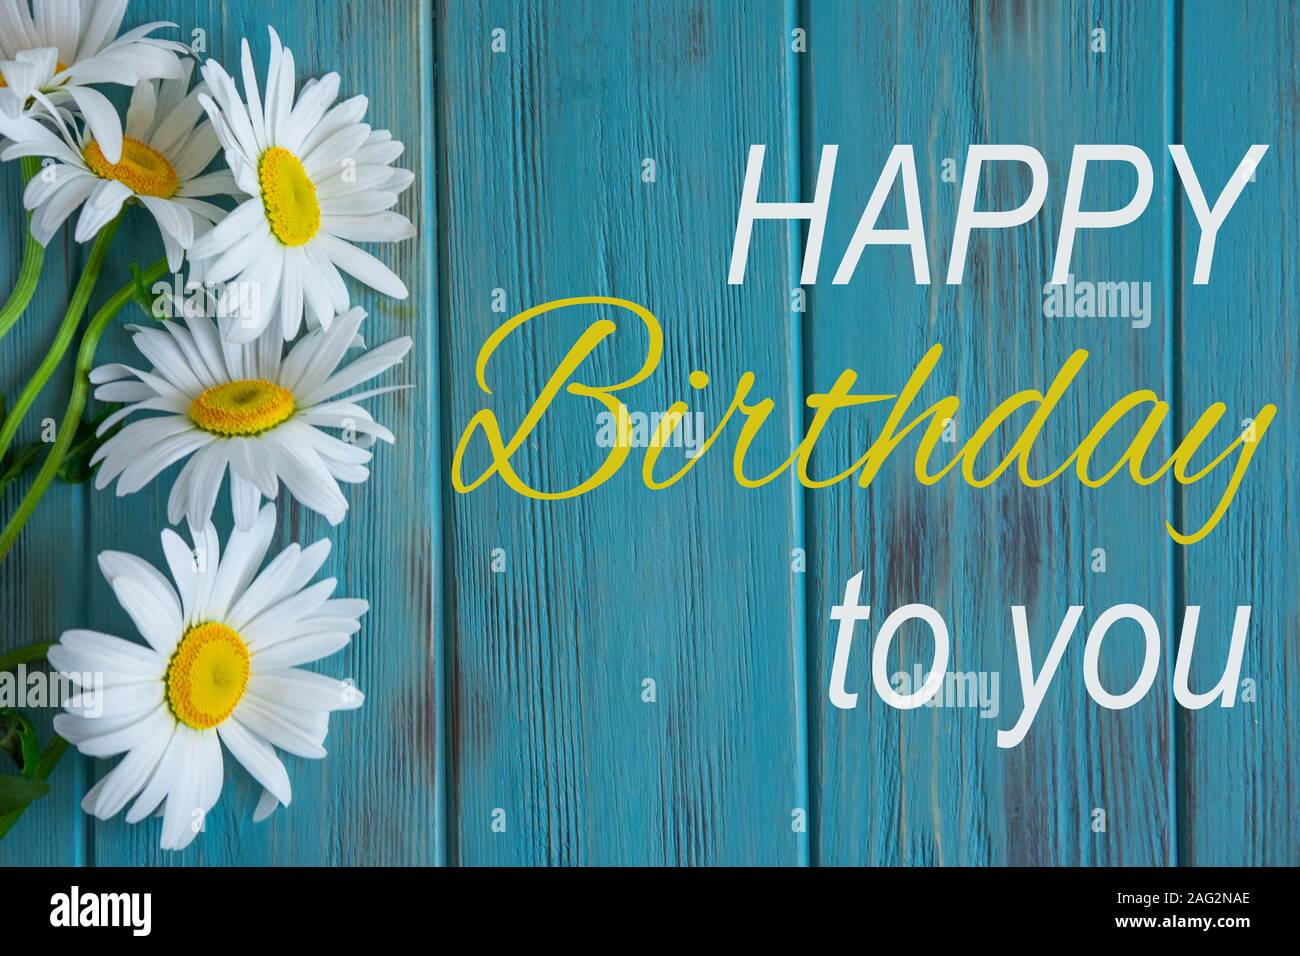 Happy birthday greeting card with camomile flowers on wooden ...